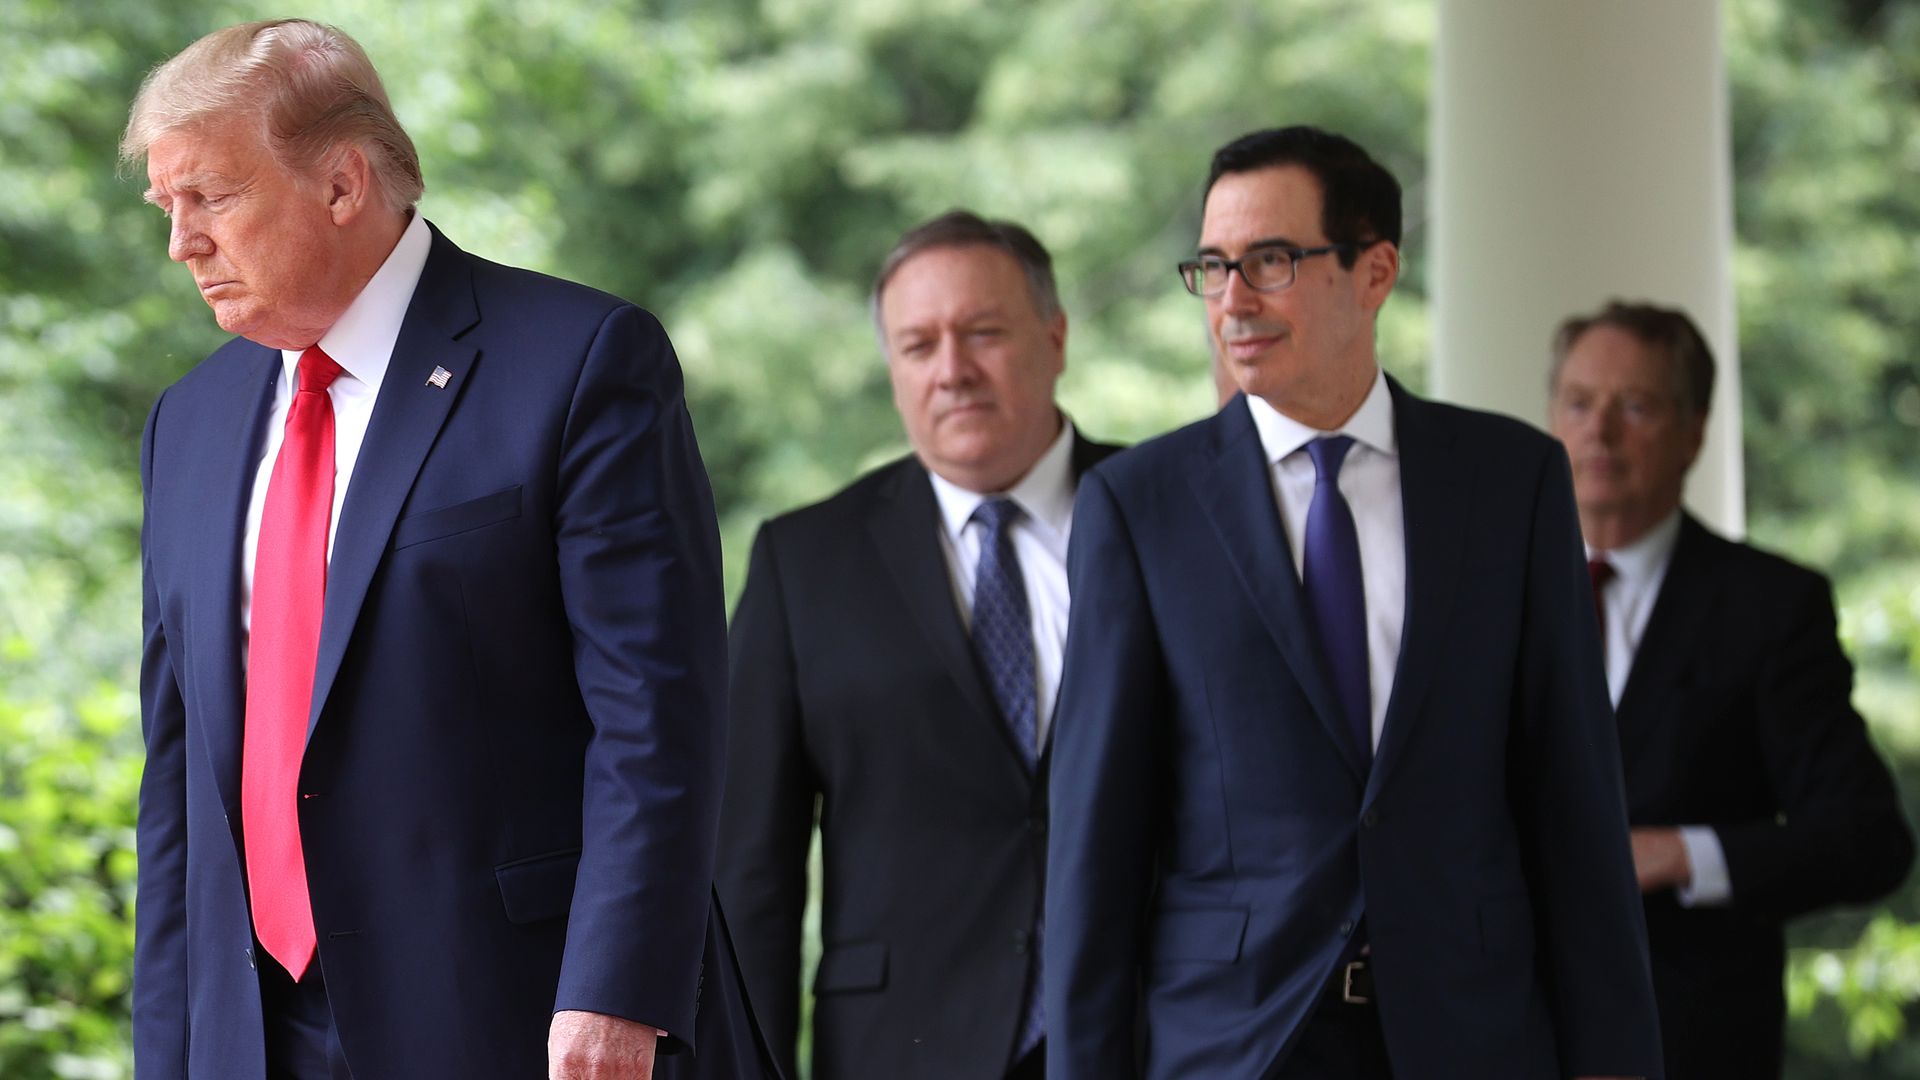 Mnuchin and Trump walk together in the foreground with Bill Barr in the background, all wearing suits and ties